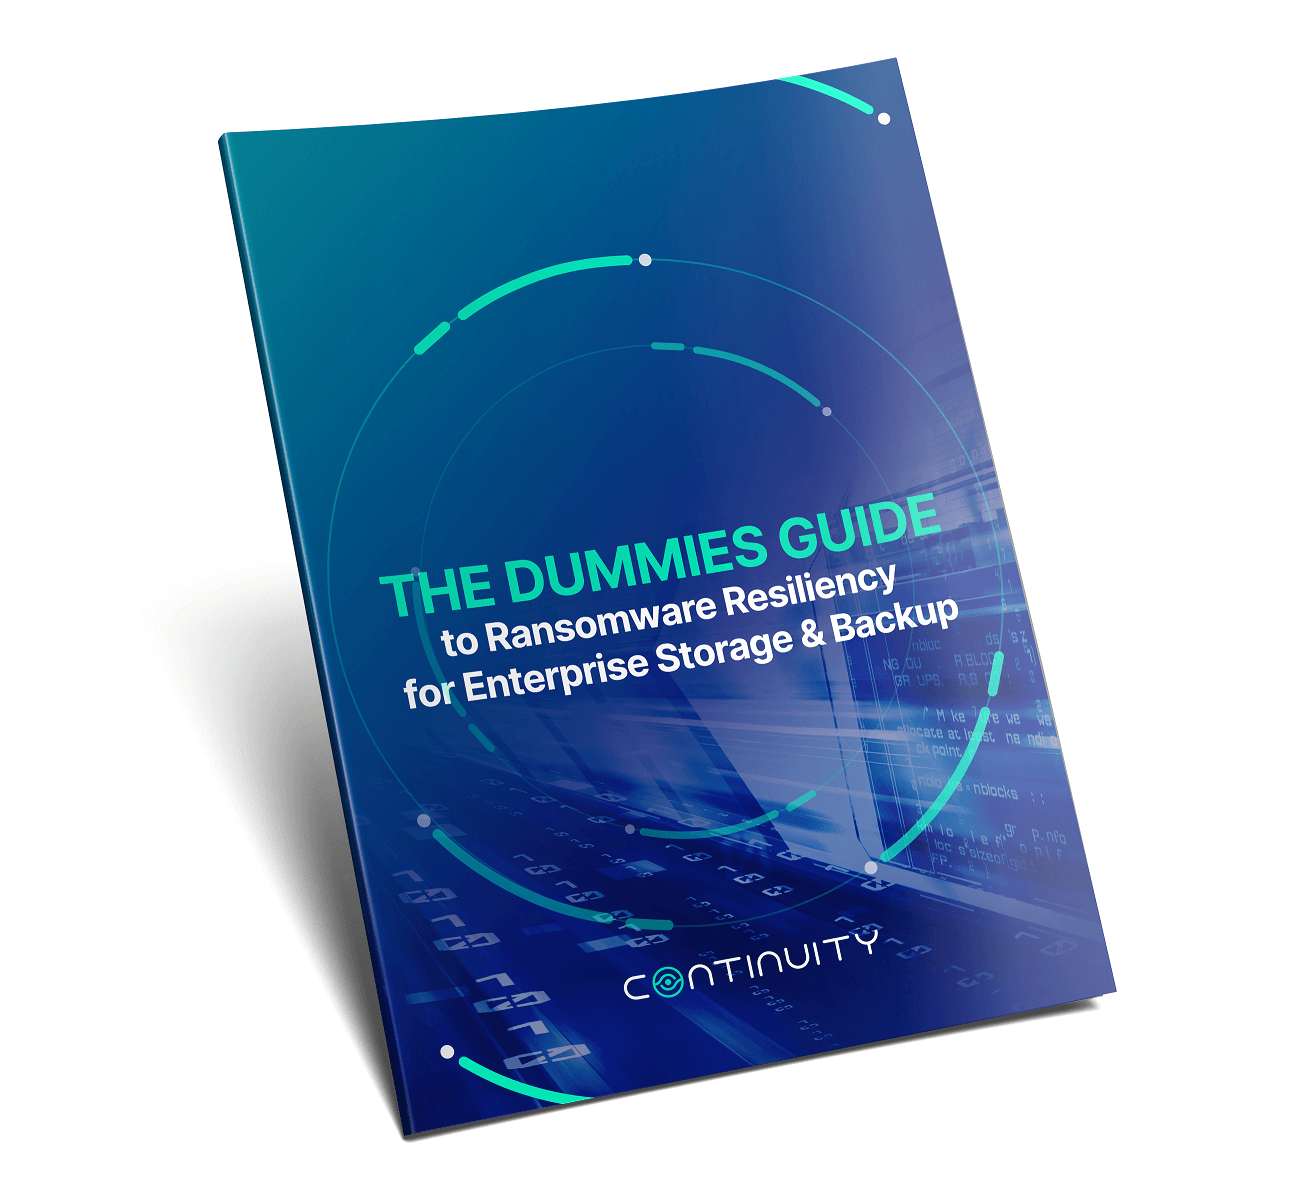 The Dummies Guide to Ransomware Resiliency for Enterprise Storage & Backup